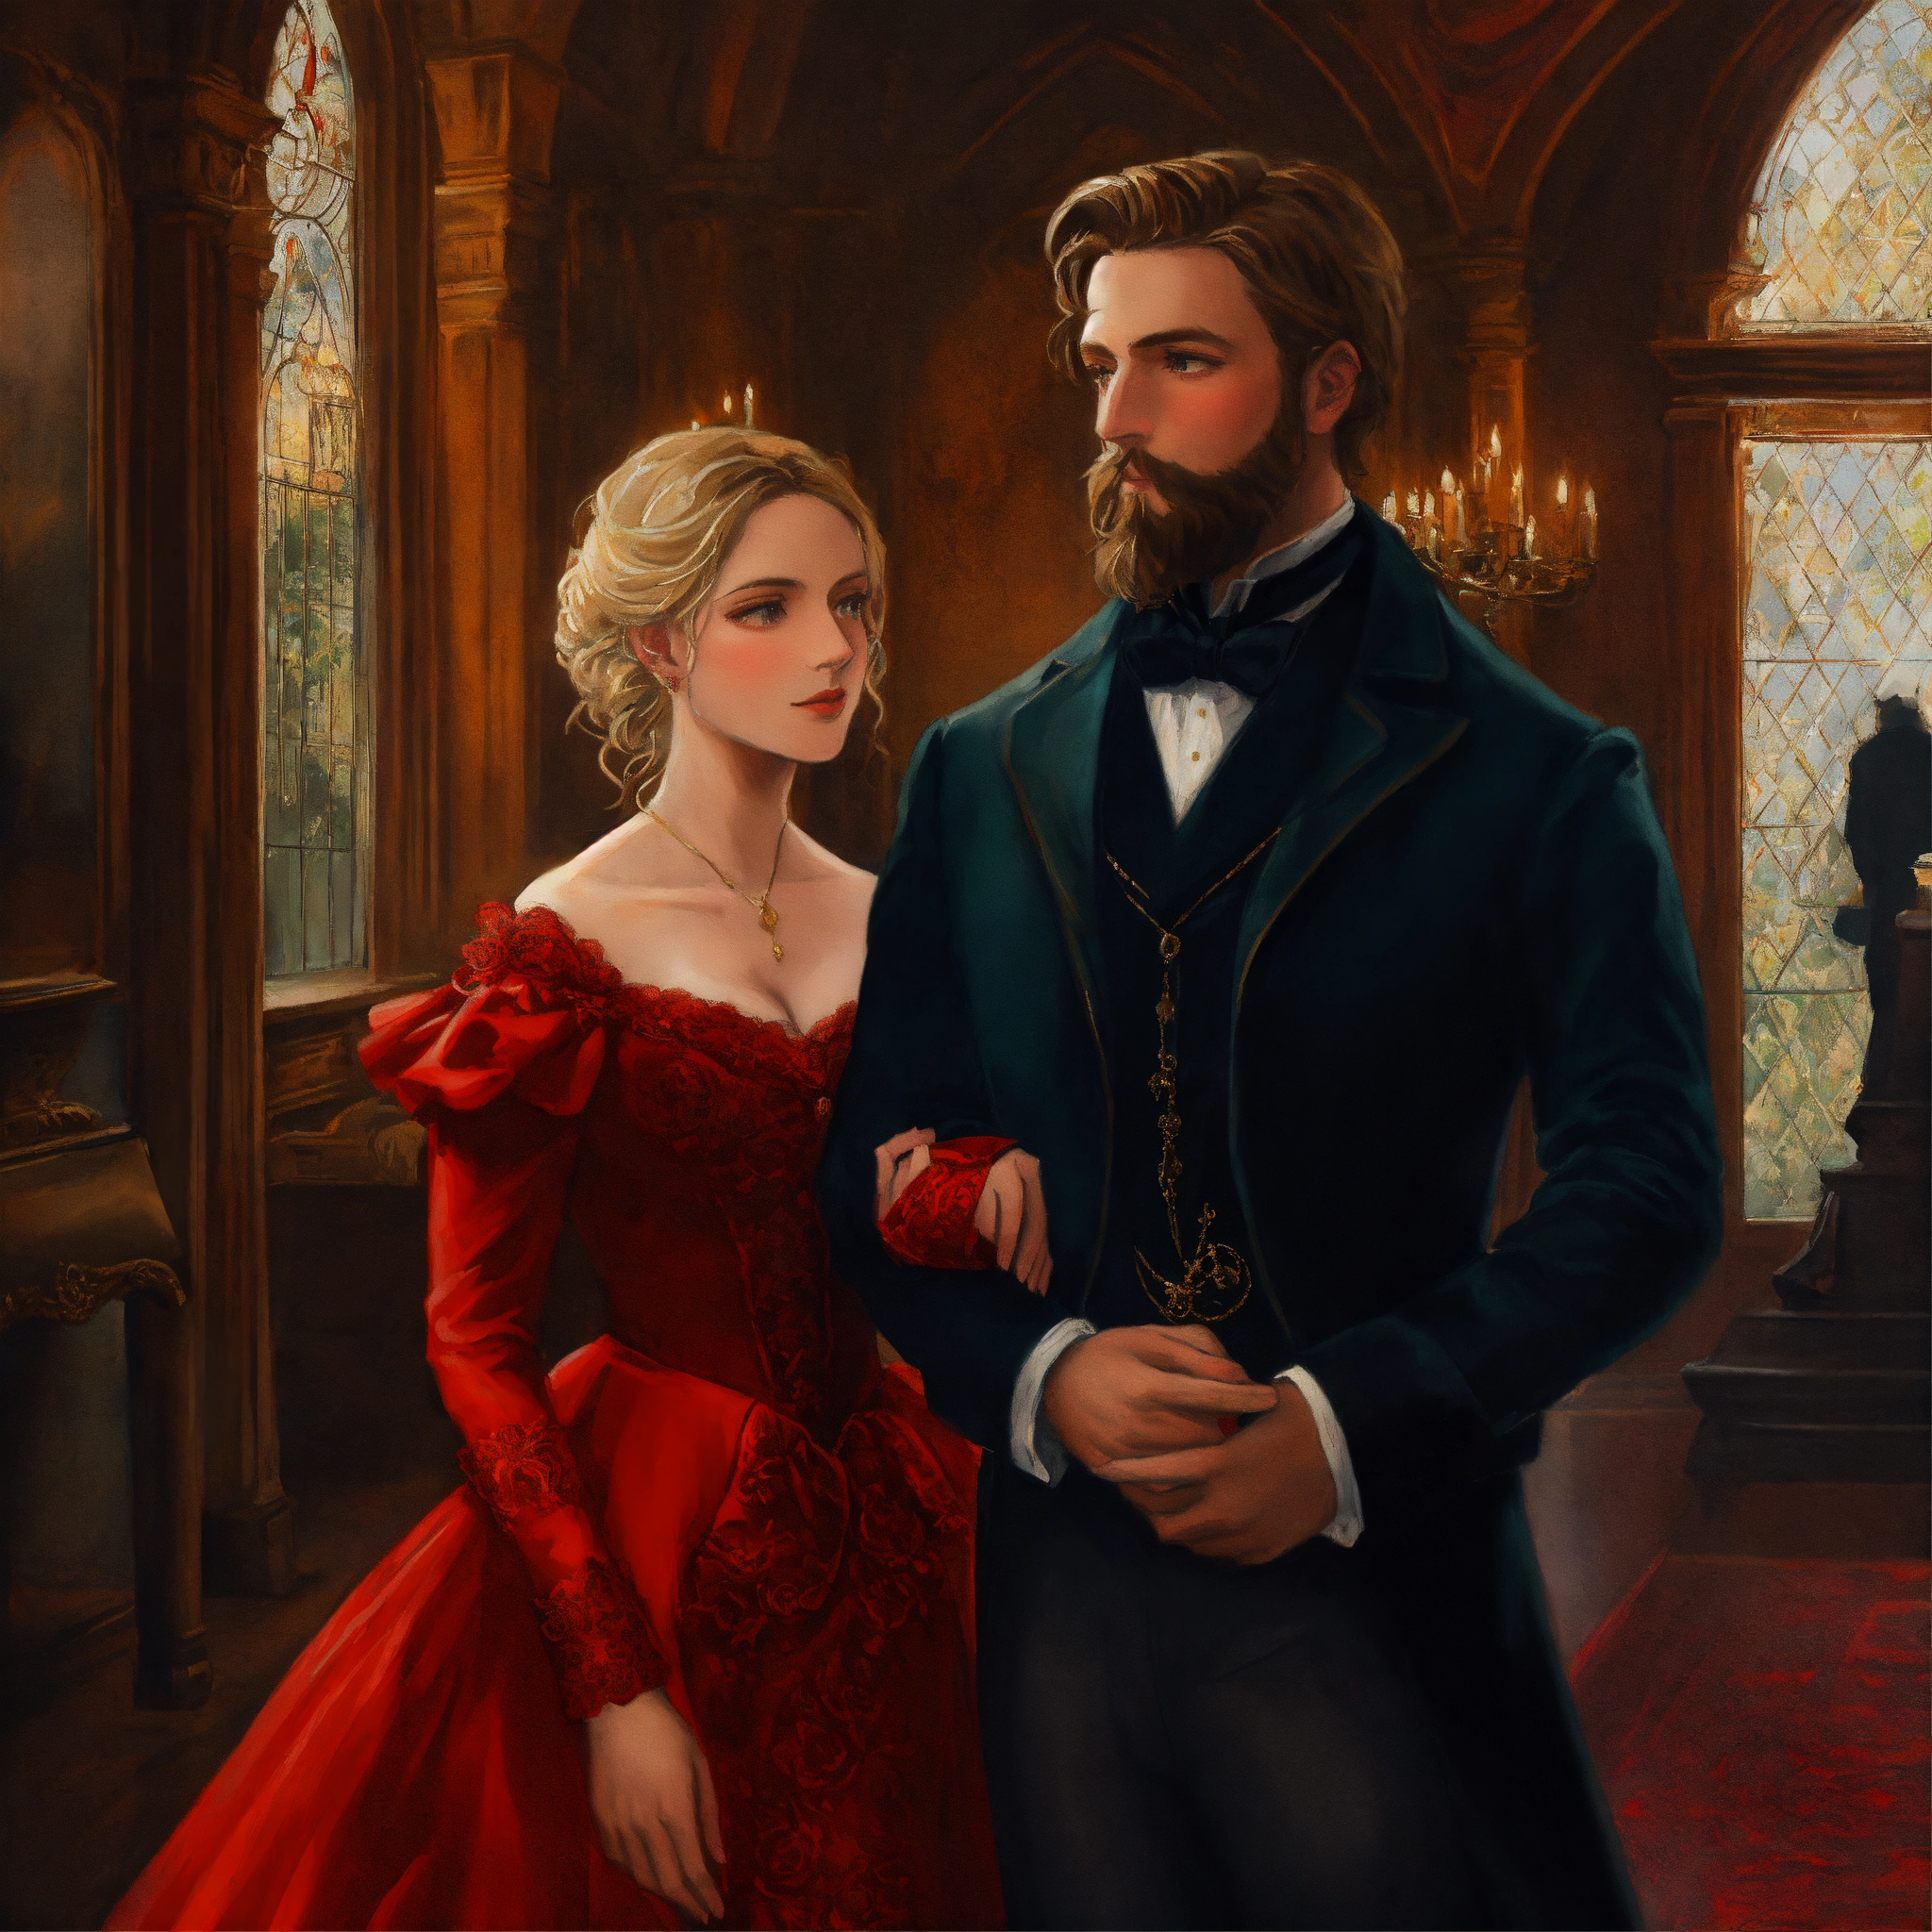 Lexica - Painting of a 19th century couple inside a gothic style Victorian  mansion. the woman has blonde hair and is wearing a red gown. the man has